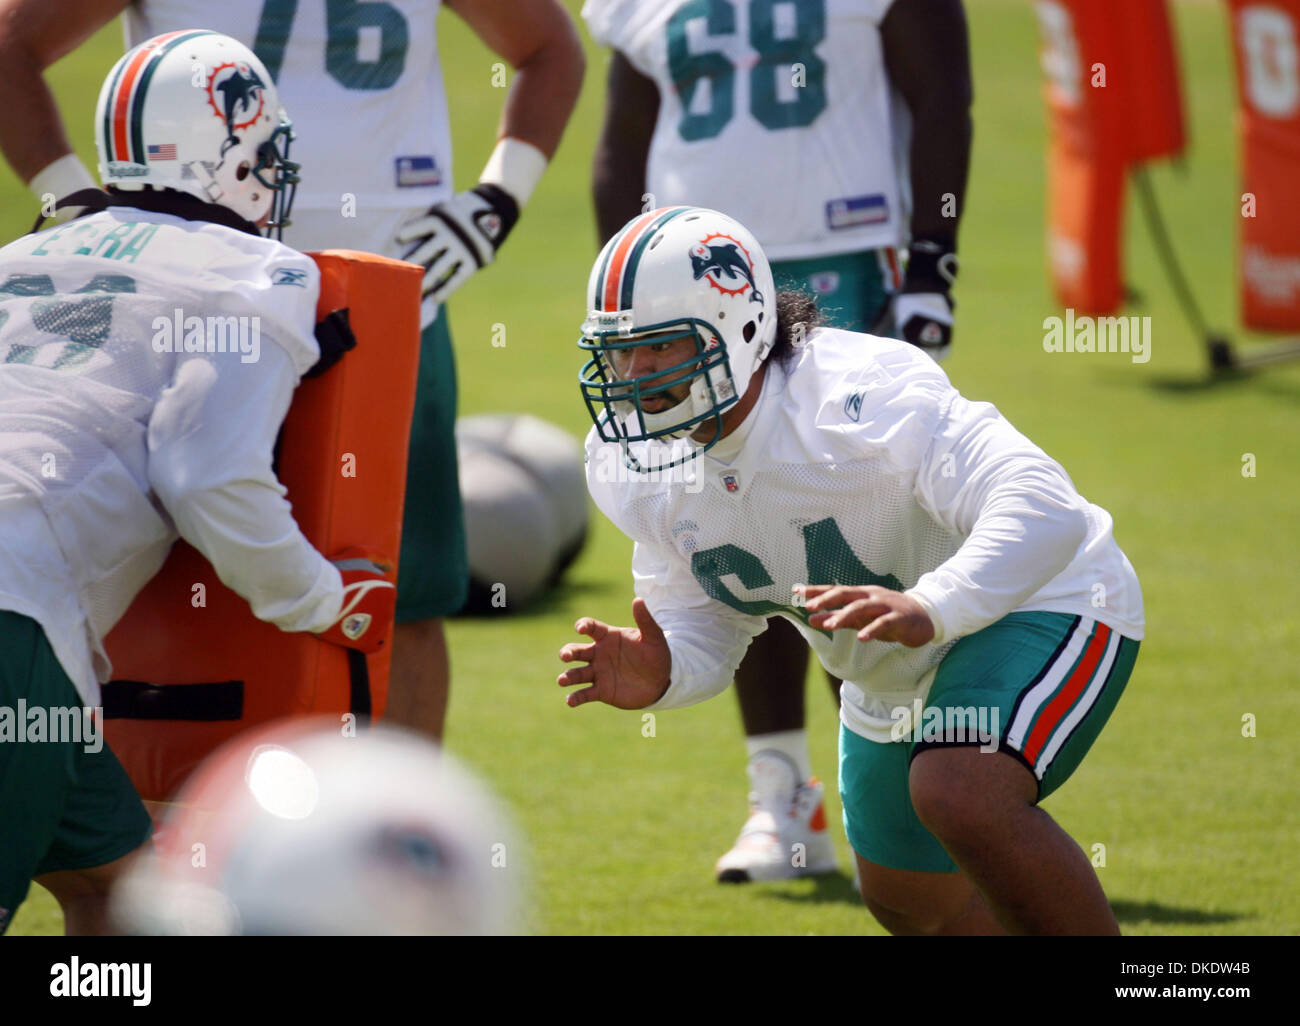 Apr 24, 2007 - Davie, FL, USA - Offensive lineman SAMSON SATELE (64), a rookie from the University of Hawaii, works on technique against TALA ESARA, left, rookie from the University of Hawaii, at the Miami Dolphins mini-camp at Nova Southeastern University in Davie, Fla. Friday. (Credit Image: © Gary Coronado/Palm Beach Post/ZUMA Press) RESTRICTIONS: USA Tabloid RIGHTS OUT! Stock Photo